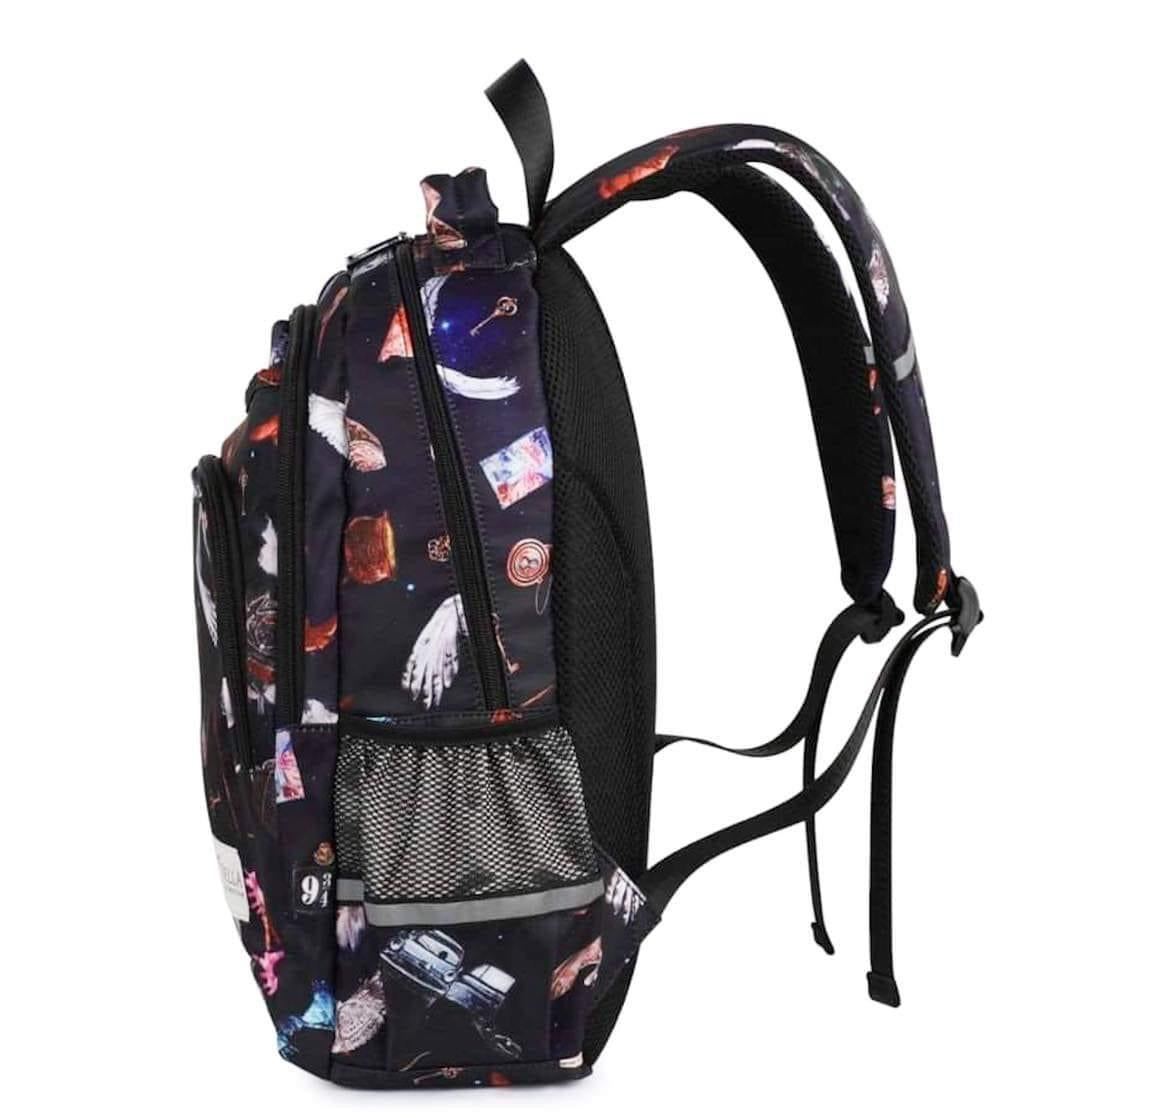 Mischief Managed Backpack